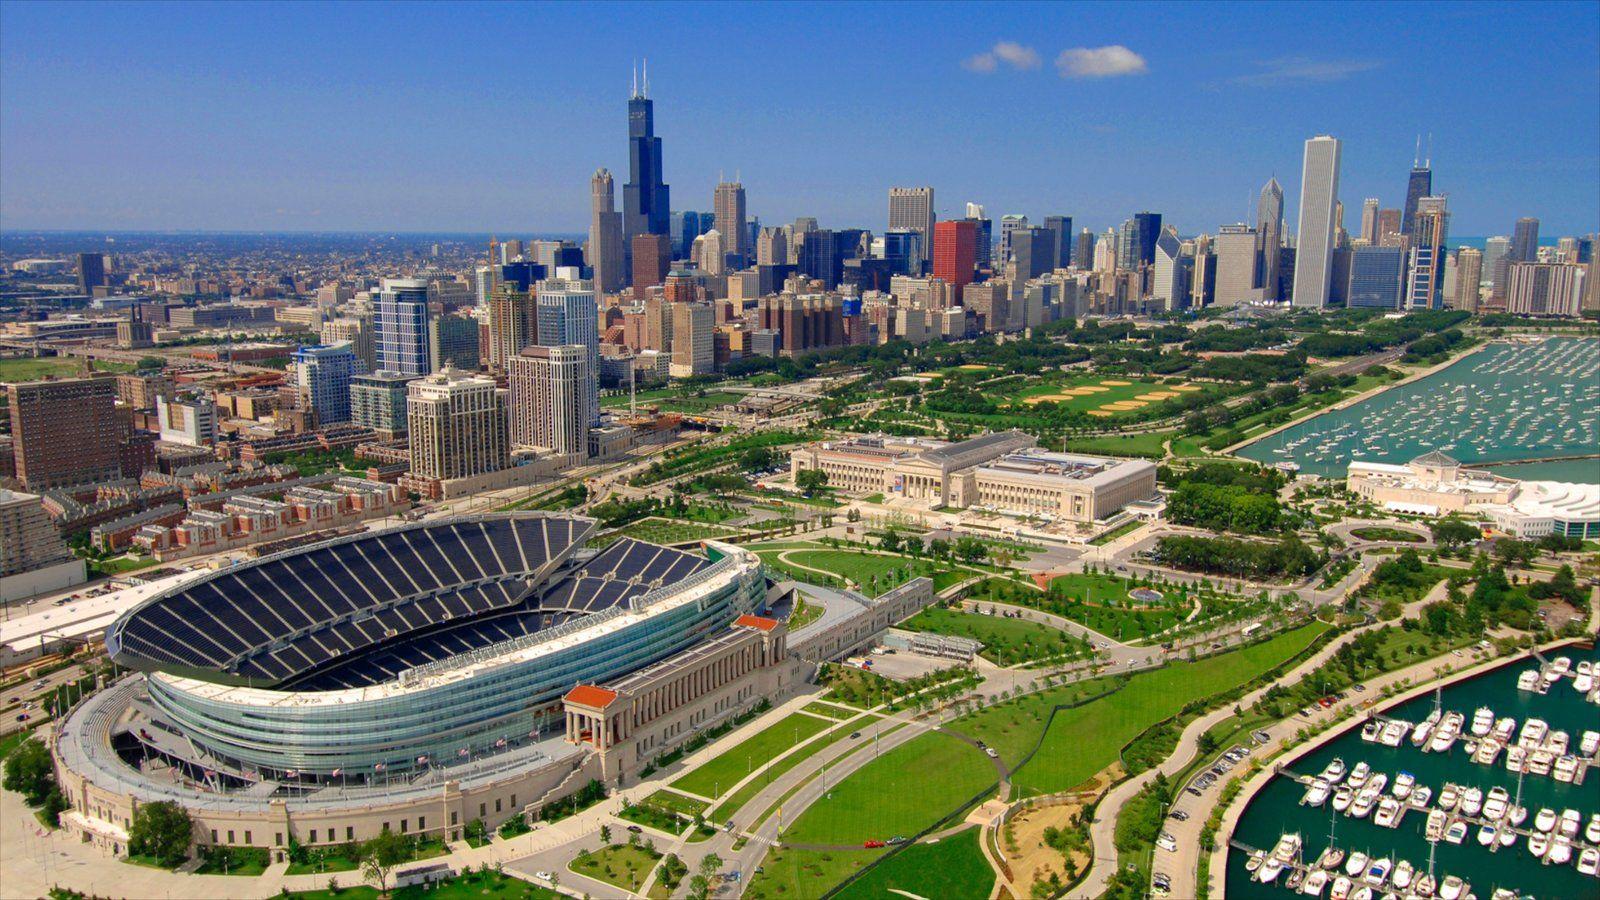 Attraction Picture: View Image of Soldier Field